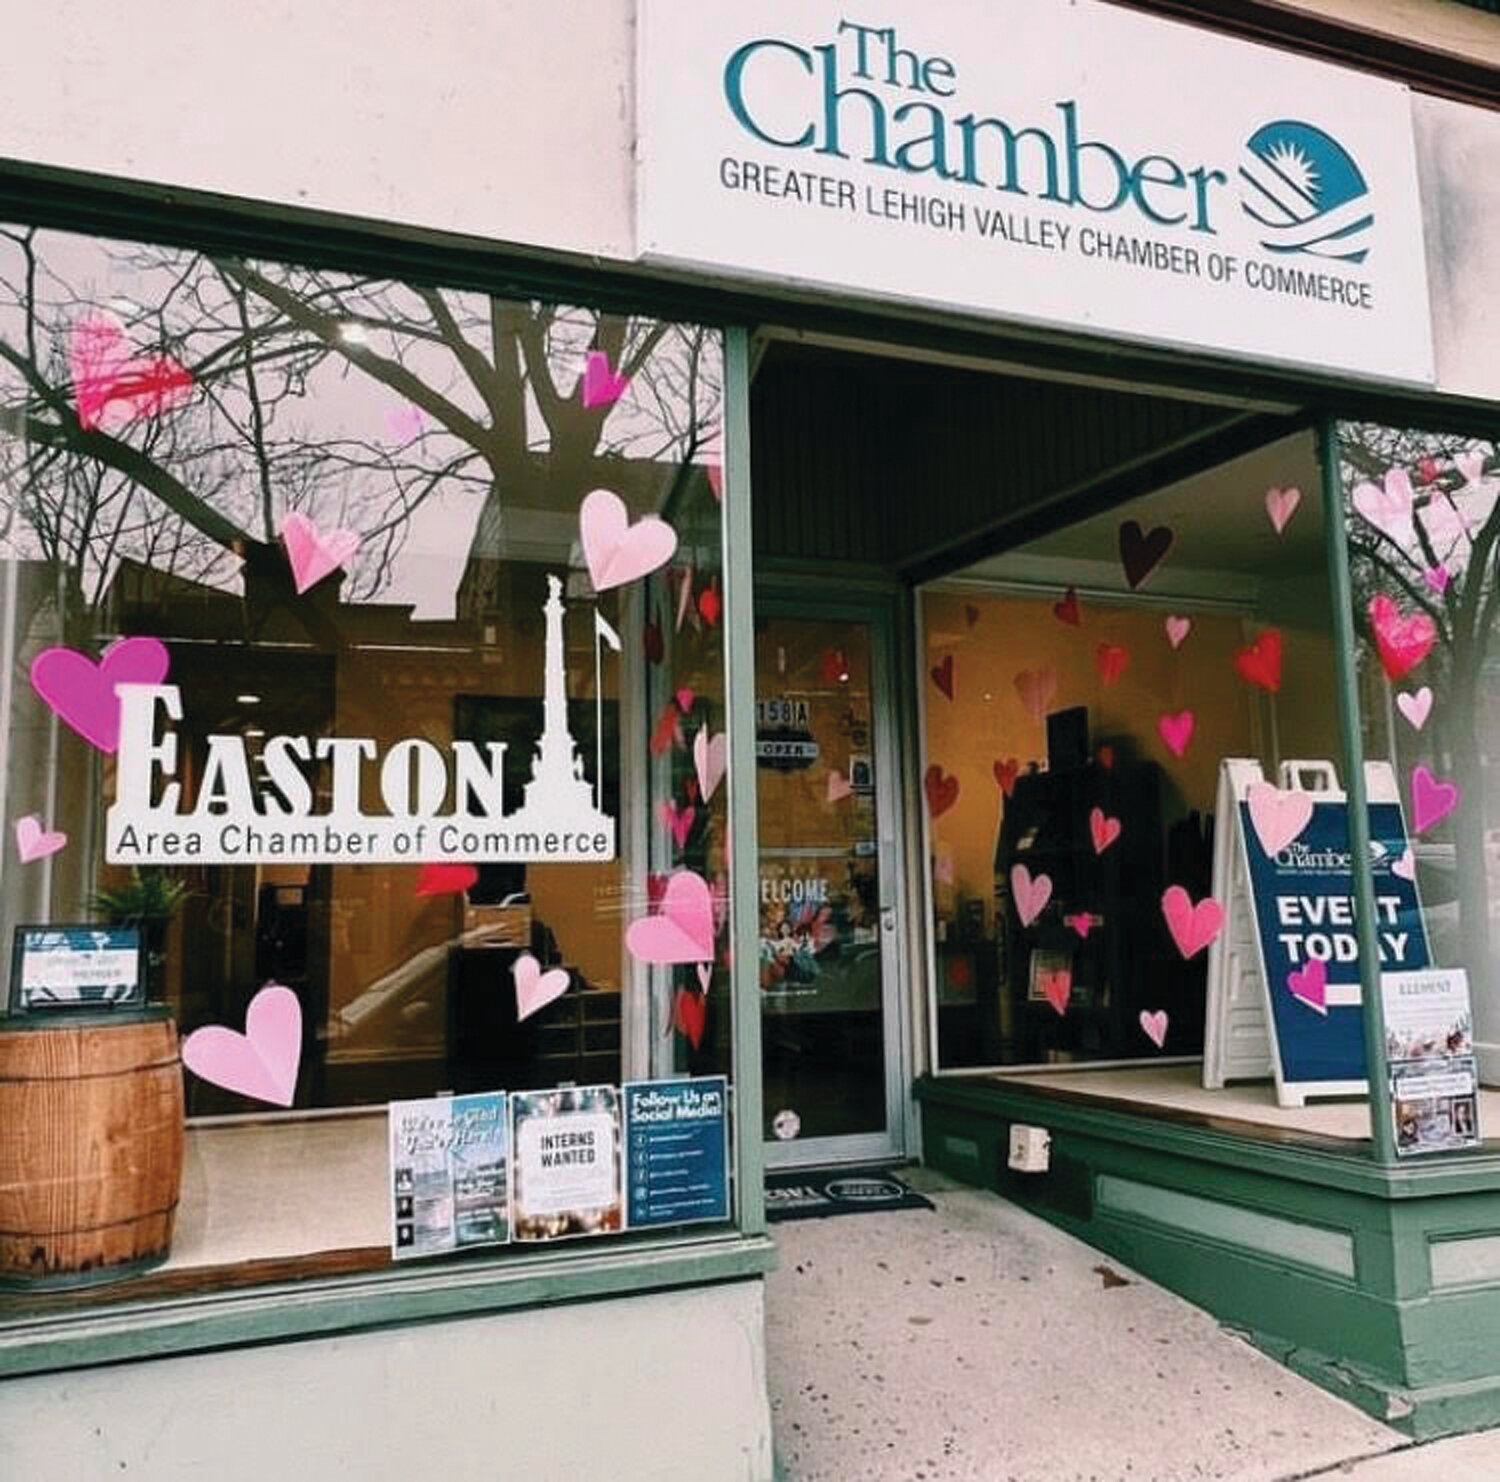 The local chamber of commerce office is decorated with hearts for “Love, Easton.”